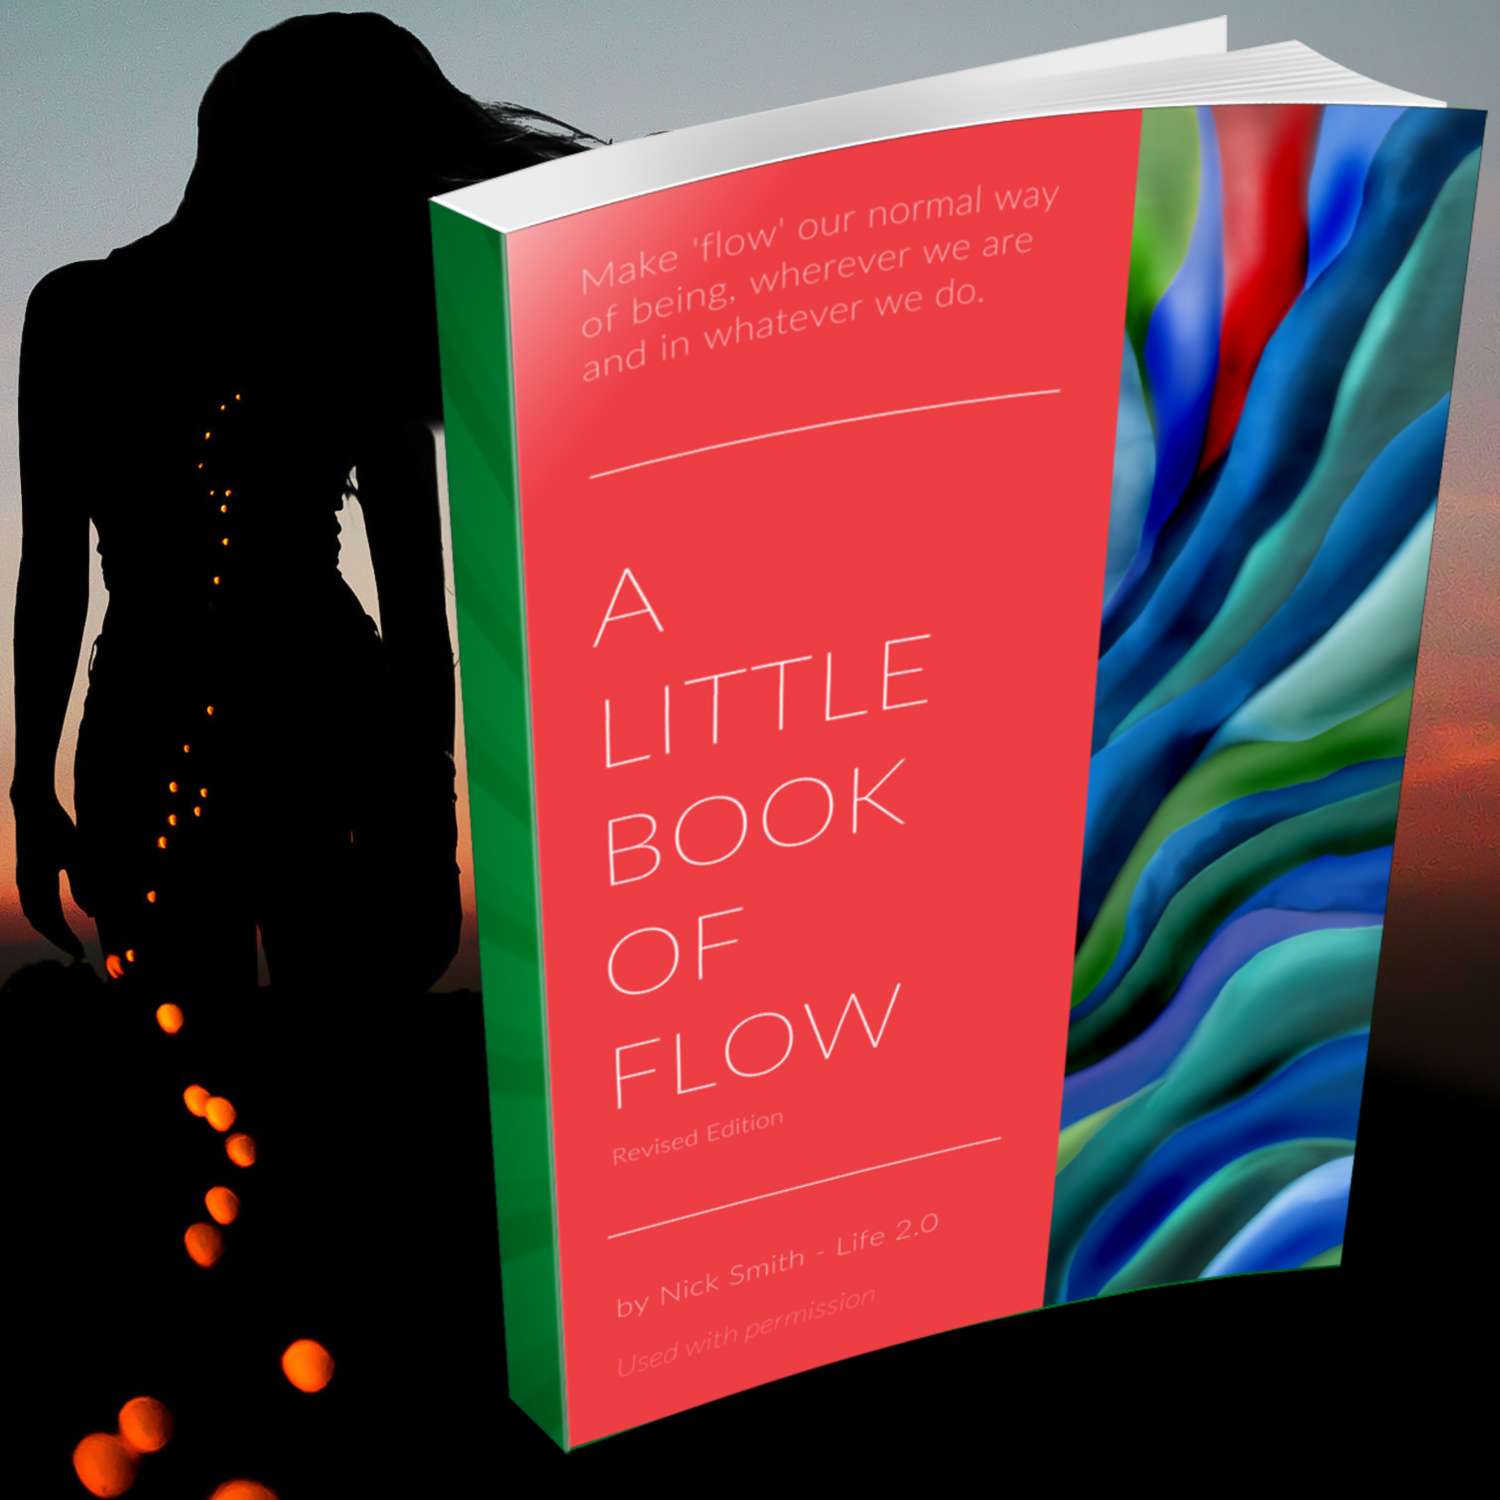 FREE EBOOK Your Little Book Of Flow free ebook  <! --- NOTE: original size 1500px X 1500px. Change height & width to scale using https://selfimprovementgift.com/forwardsteps/image-resize/ -- >